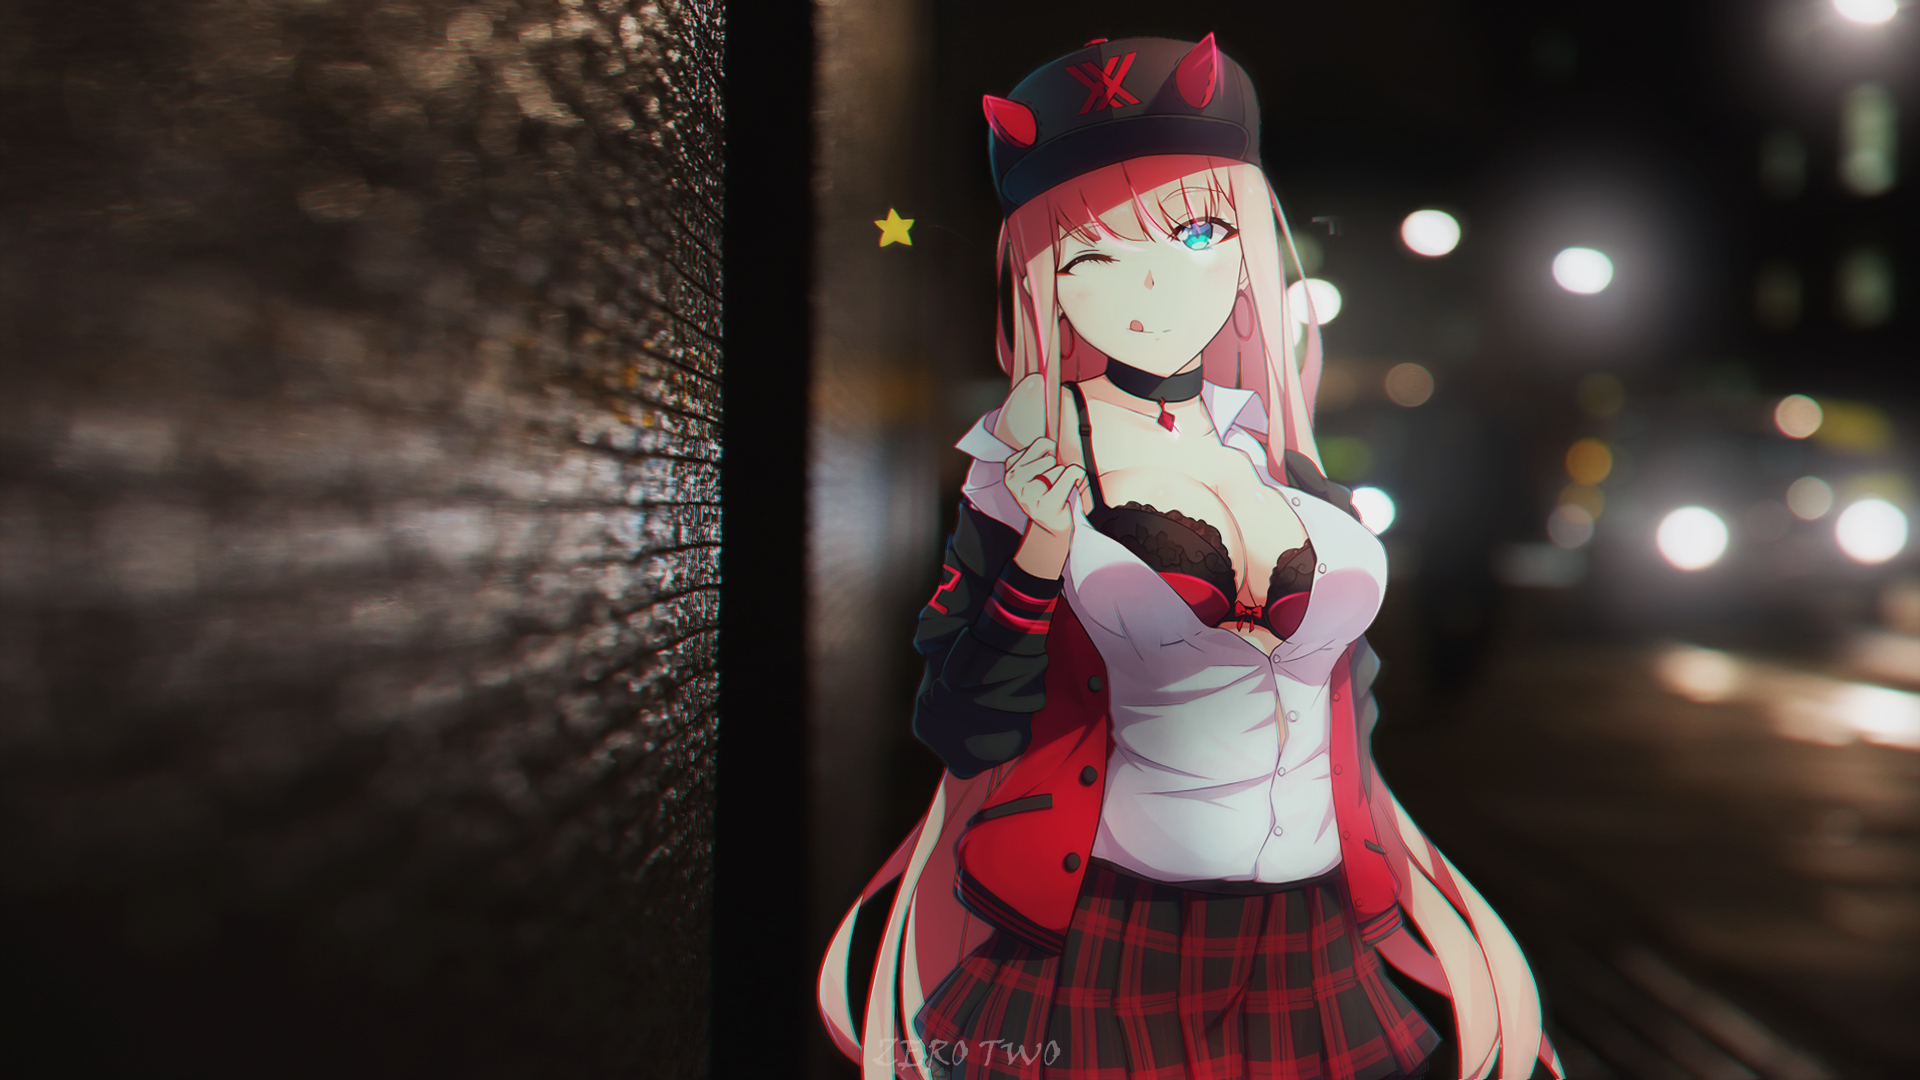 Anime 1920x1080 Zero Two (Darling in the FranXX) anime light blue hair night urban Darling in the FranXX anime girls tongue out hat cleavage bra boobs one eye closed animeirl